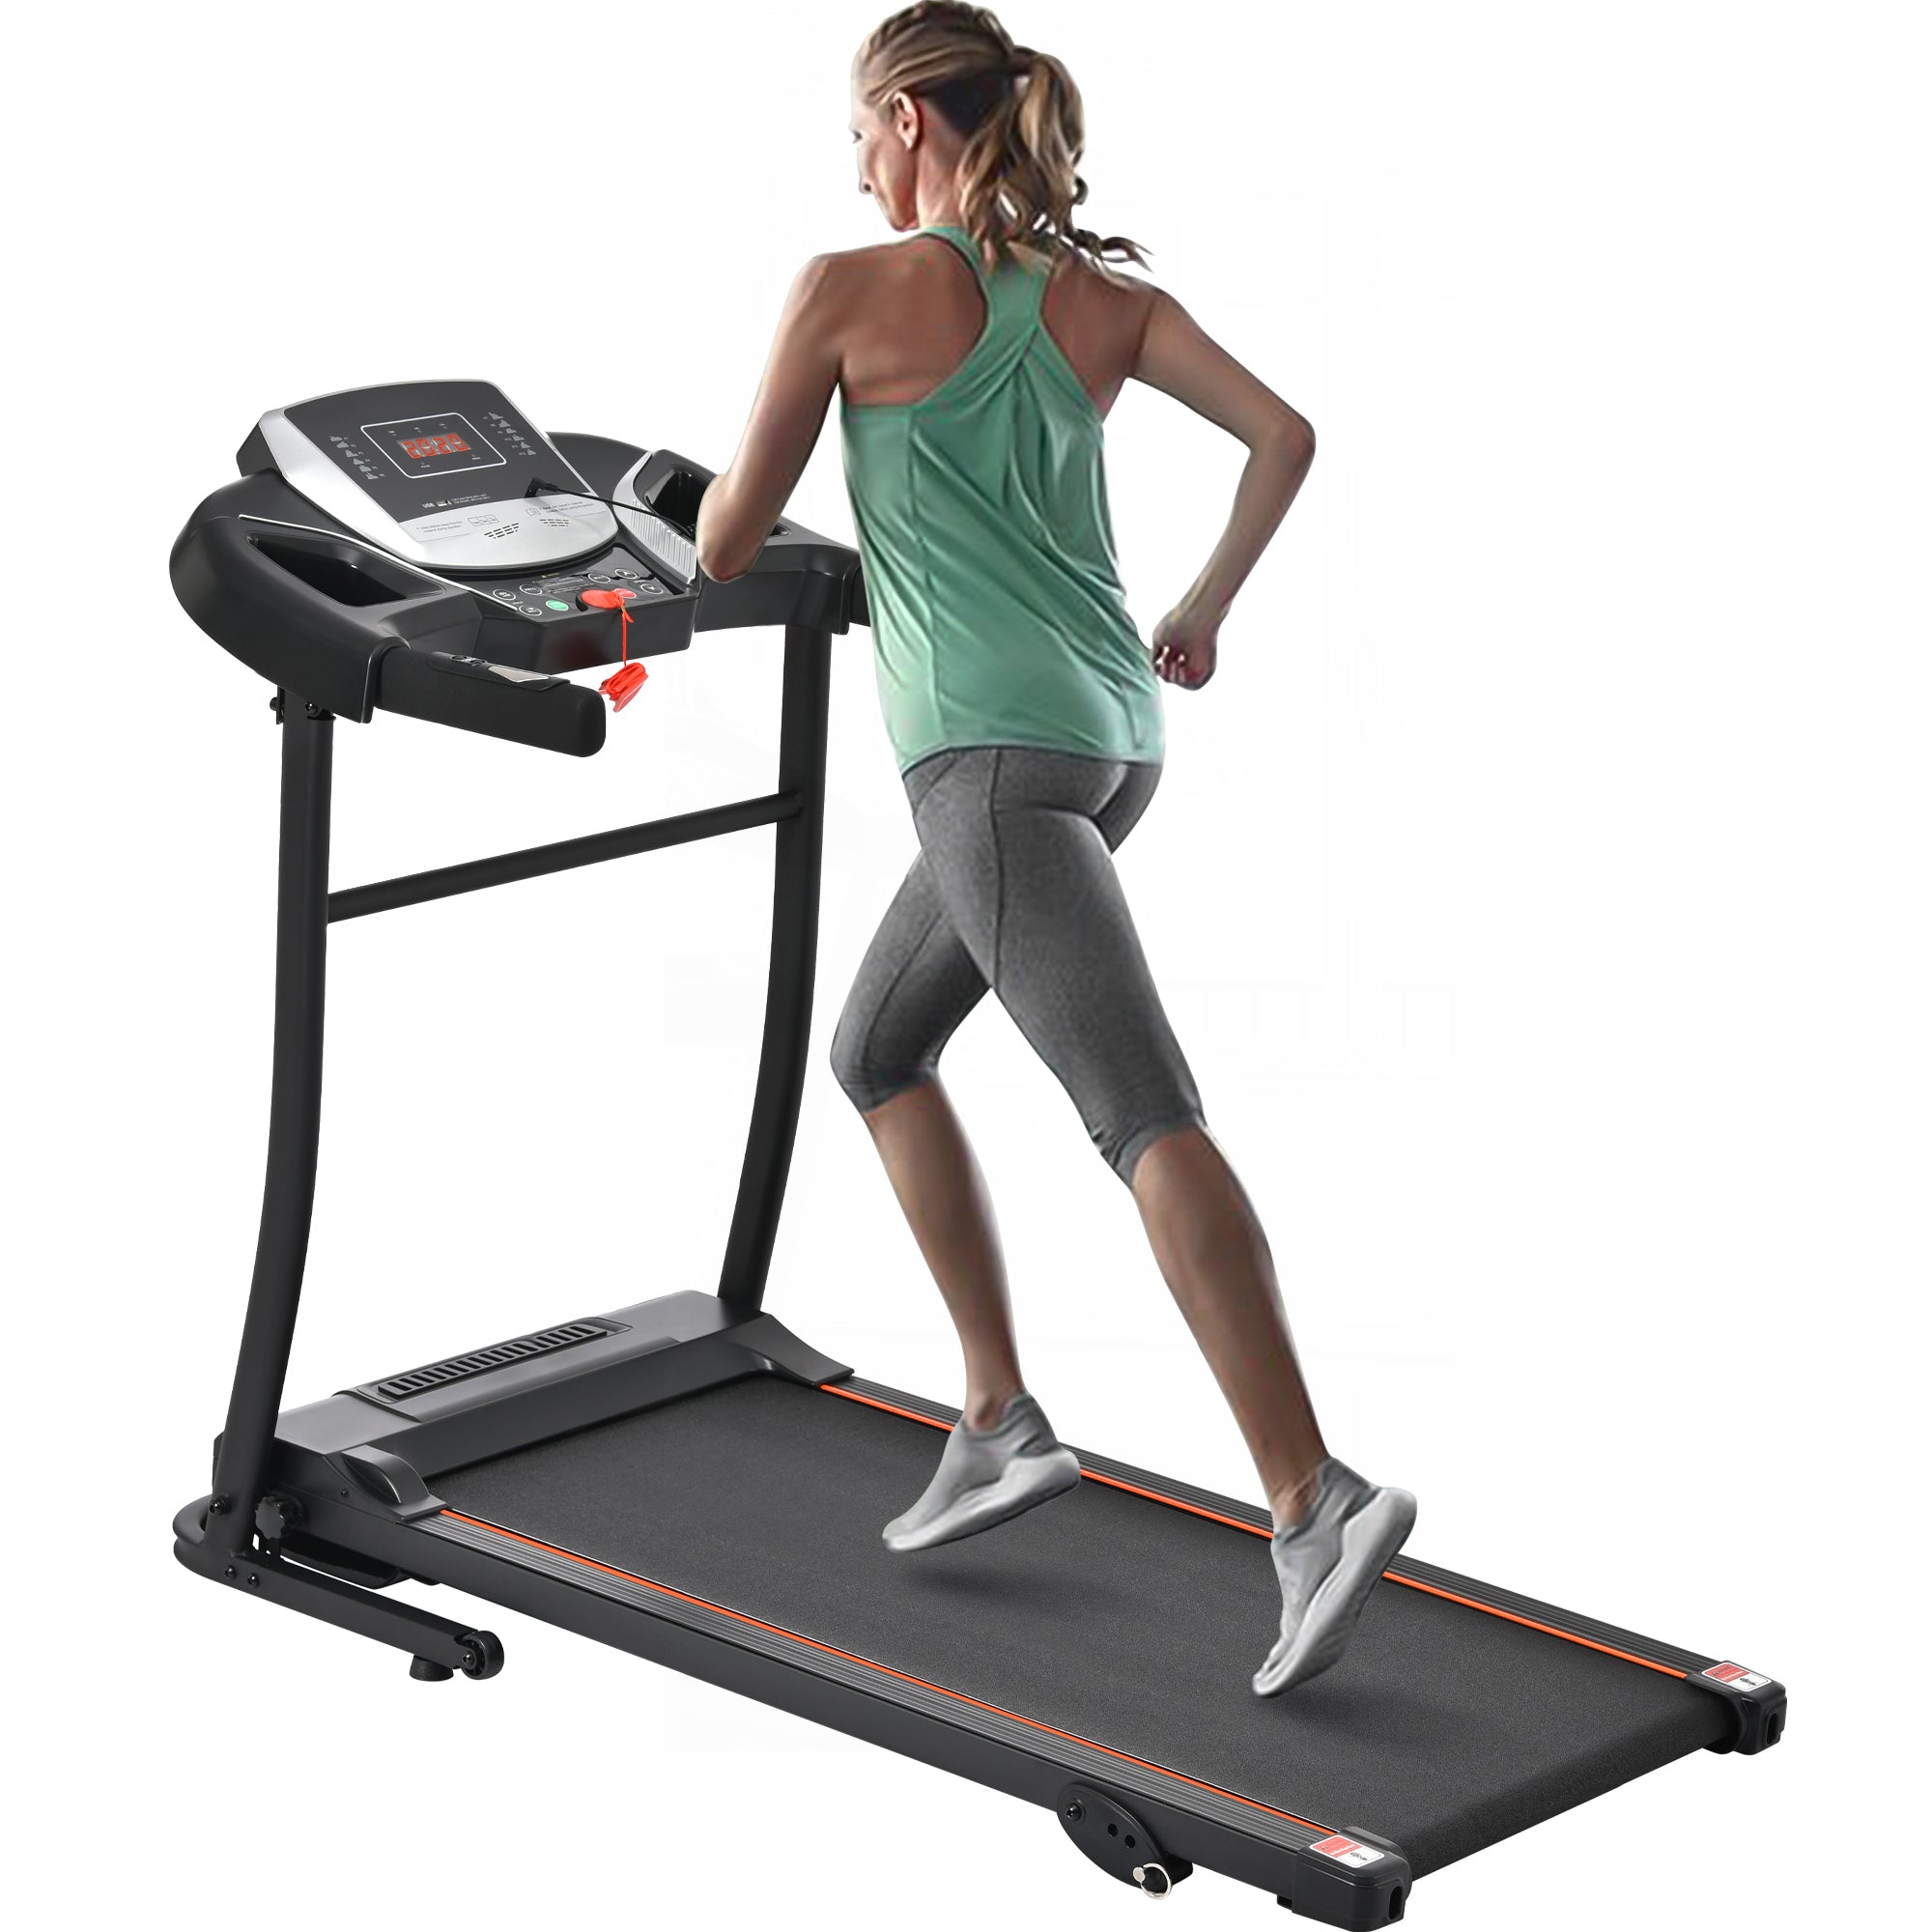 Folding-Treadmill-Electric-Running-Machine-Walking-Jogging-Machine-with-3-Level-Incline-12-Preset-Programs-for-Home-Gym-